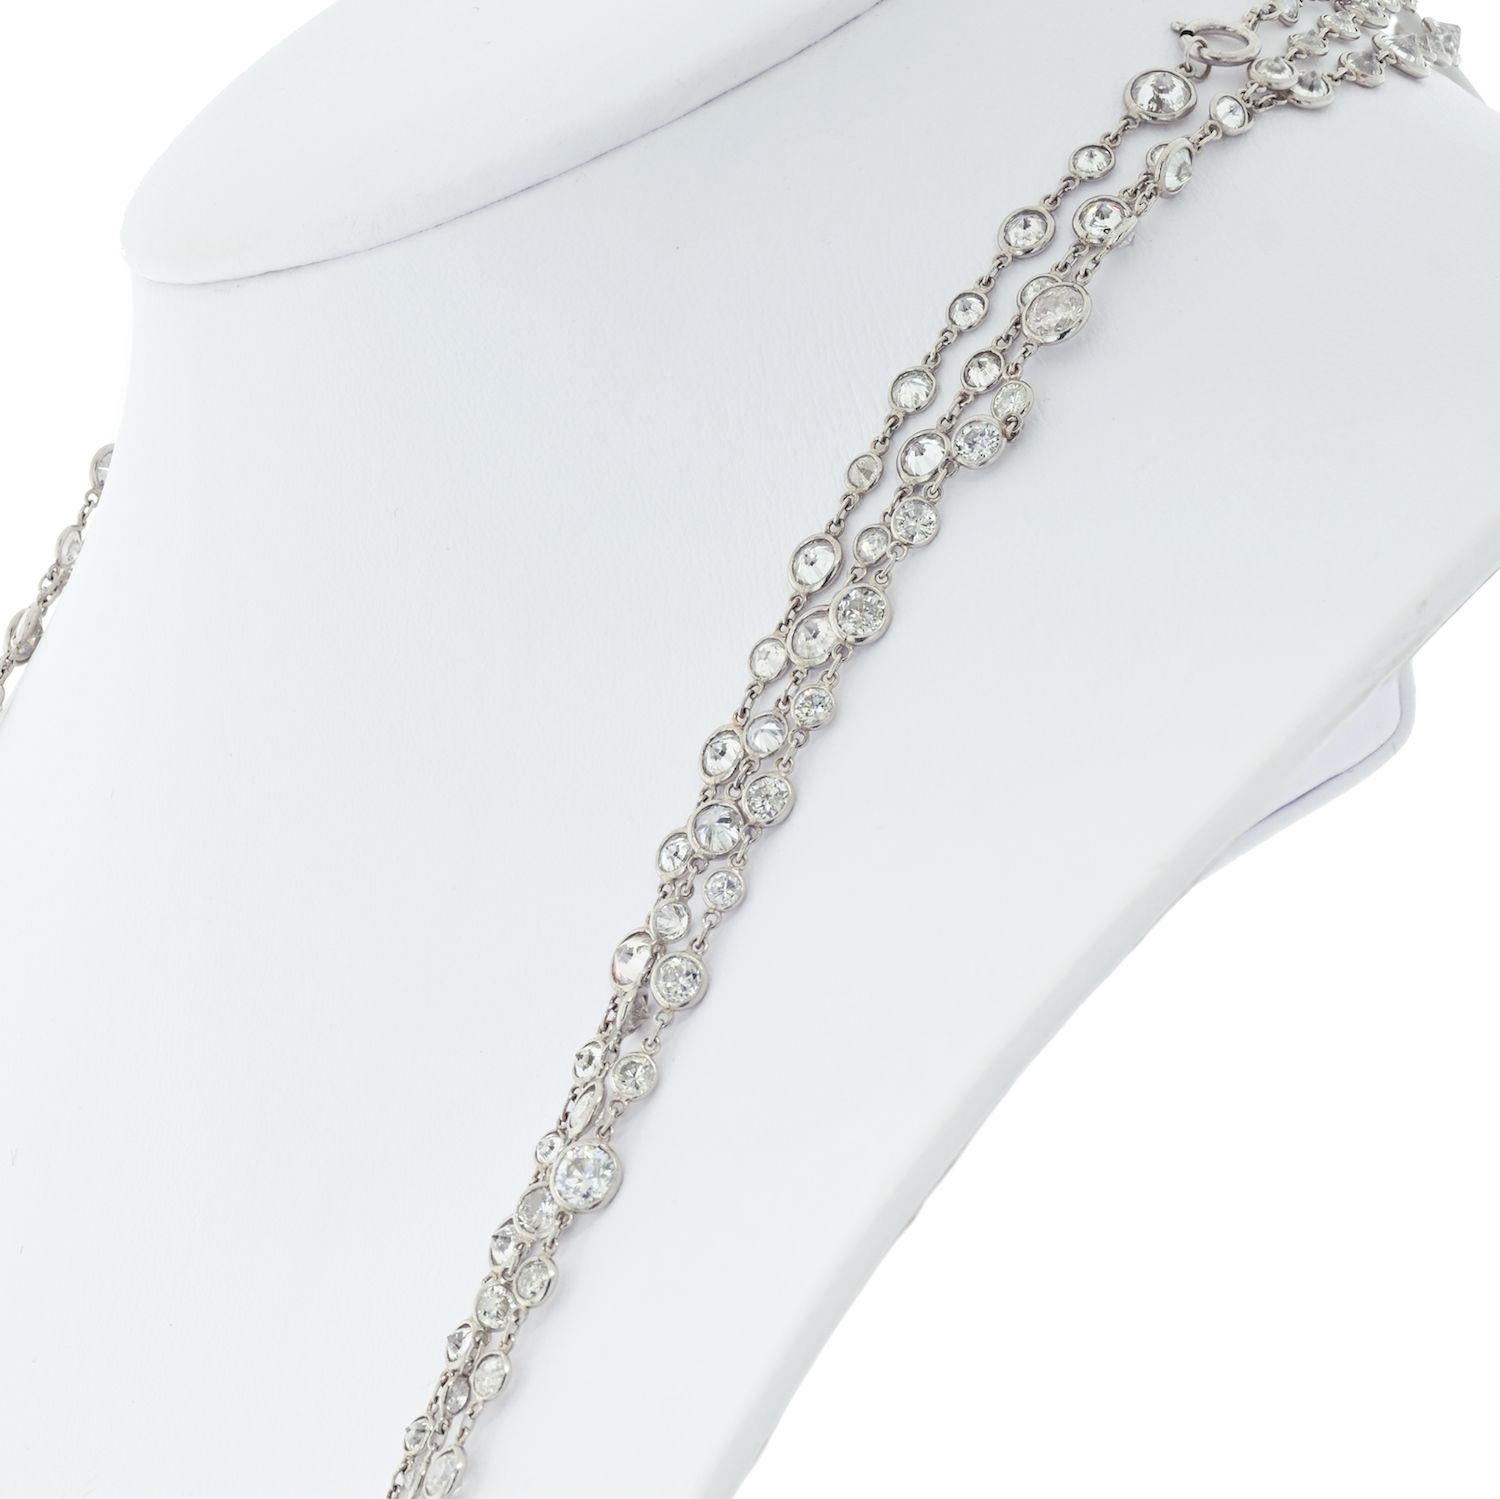 Stunning diamond by the yard chain is something any woman can use in her daily ensemble: over a white T or over a blouse, wearing little black dress, or just when in a flirty sweater diamond by the yard is your perfect accessory.

Best of all it is